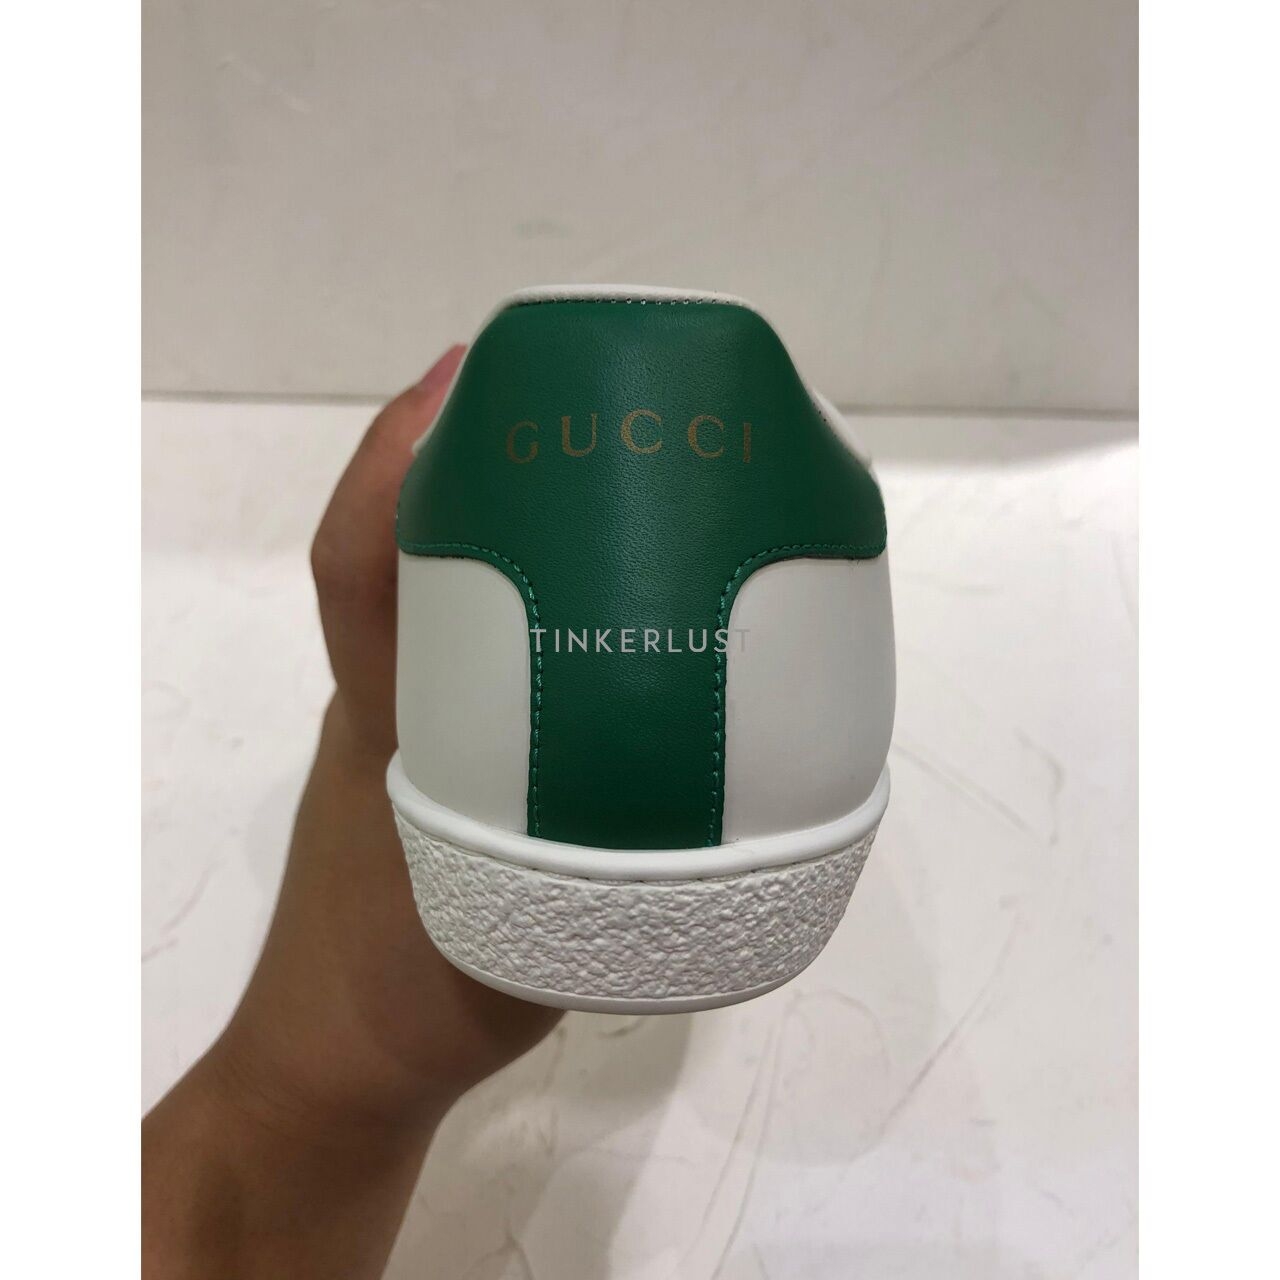 Gucci x Disney Donald Duck White Leather Sneakers